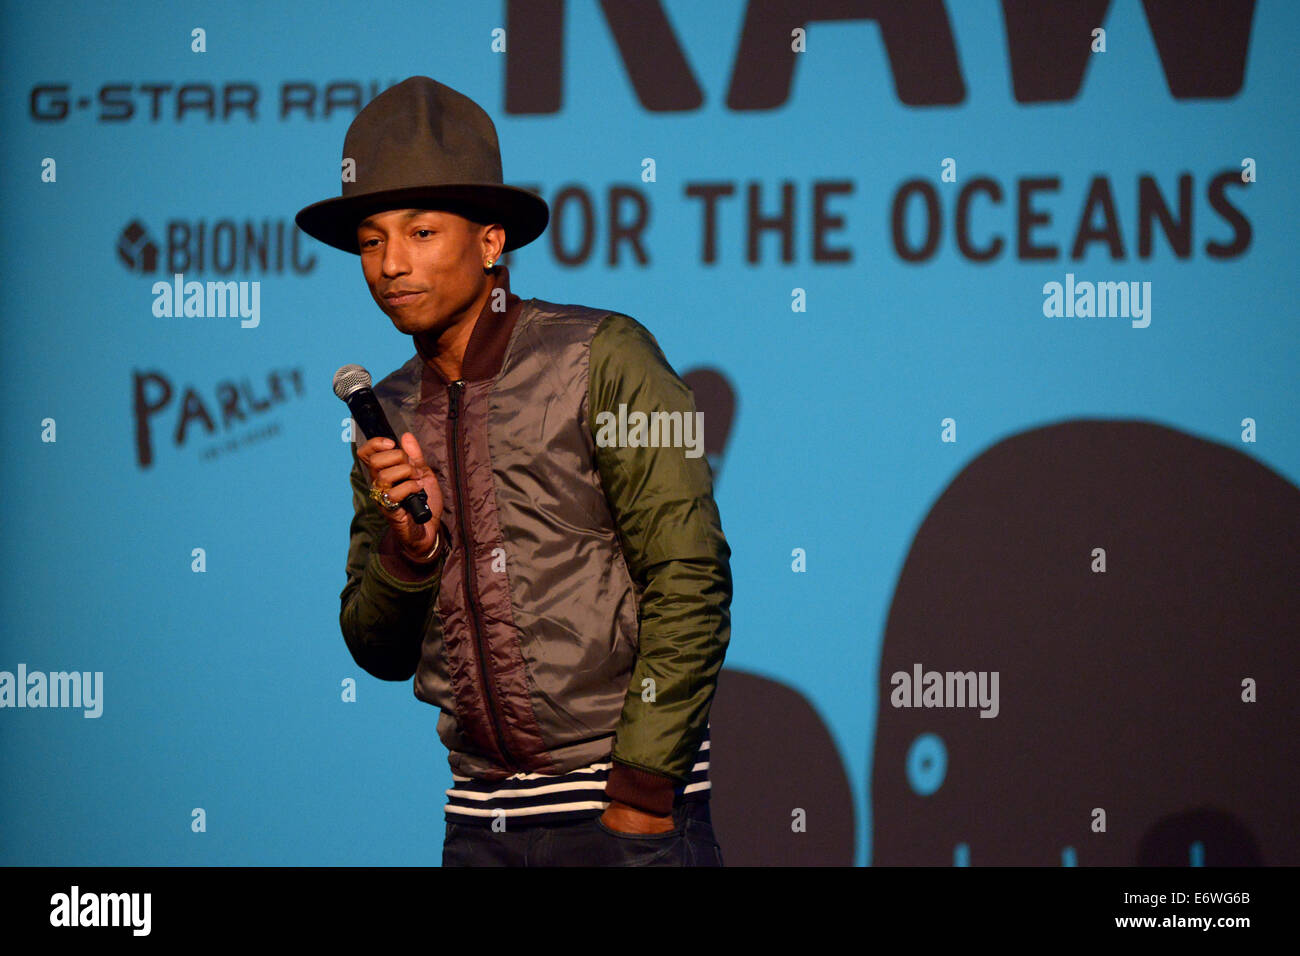 RAW for the Oceans' - Long-term Collaboration Between Bionic Yarn and G-Star  Turning Ocean Plastic into Denim - Press Conference Featuring: Pharrell  Williams Where: Manhattan, New York, United States When: 09 Feb